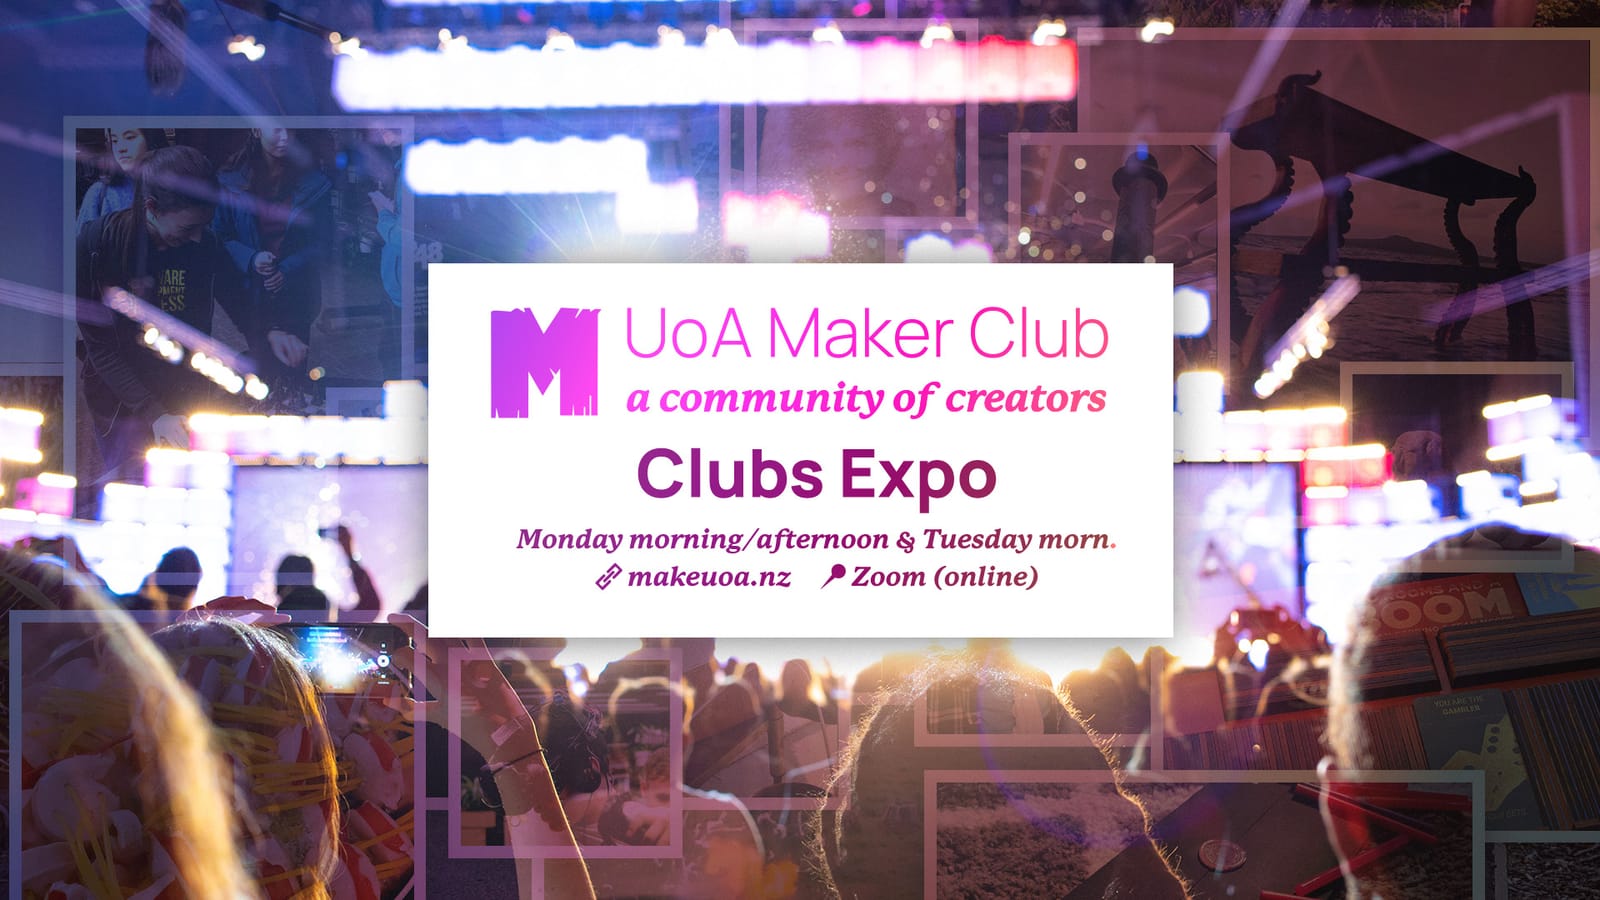 Monday & Tuesday: Join us at Clubs Expo!